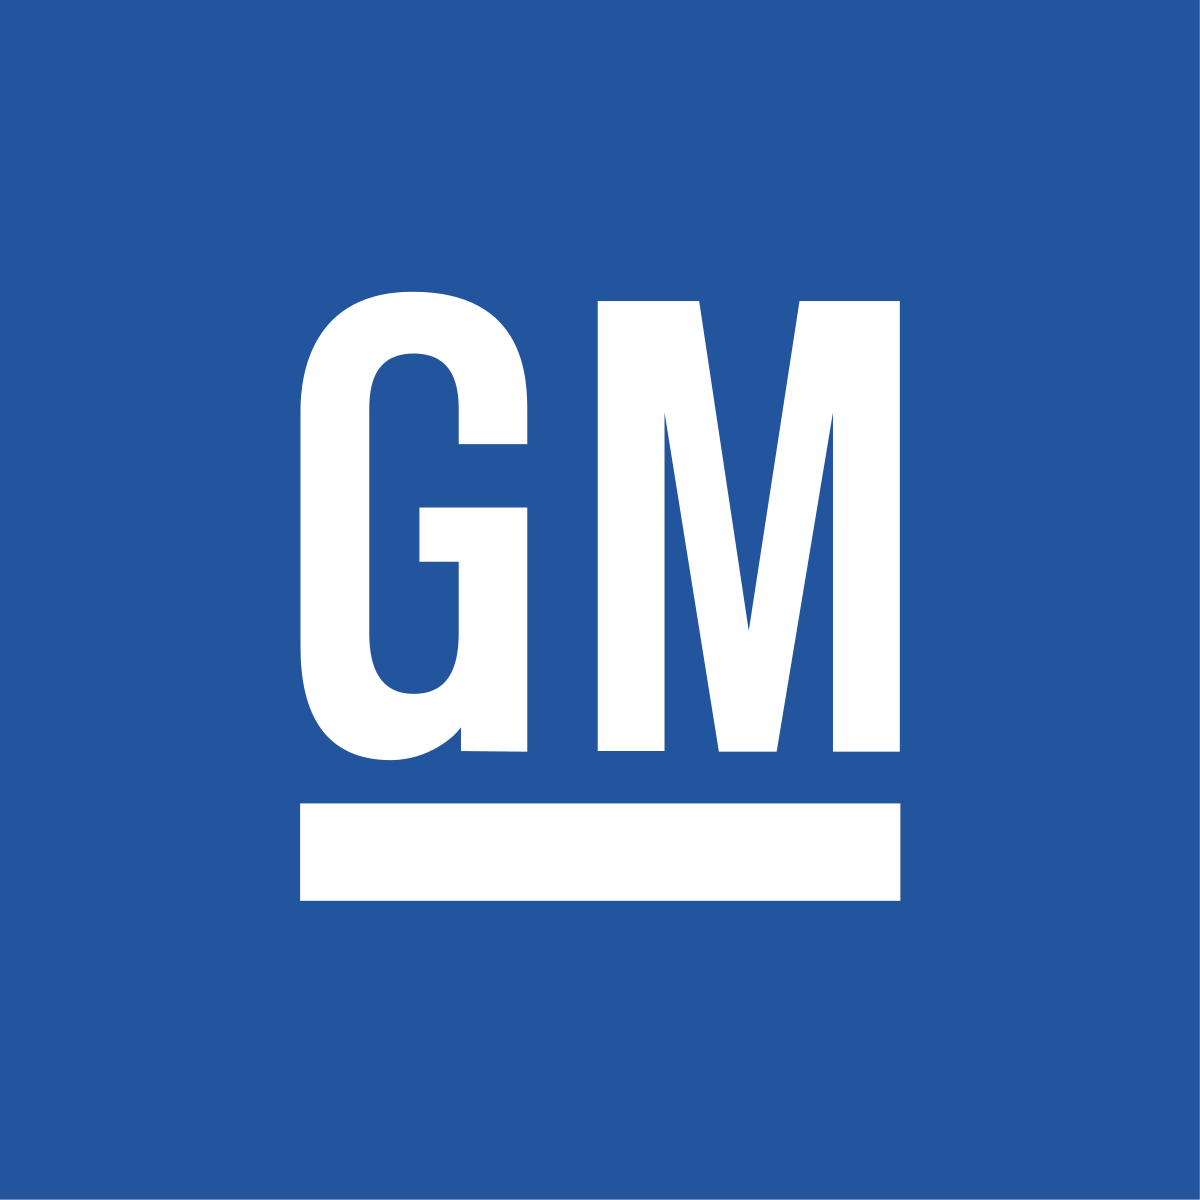 In 1959, General Motors was America’s largest corporation.